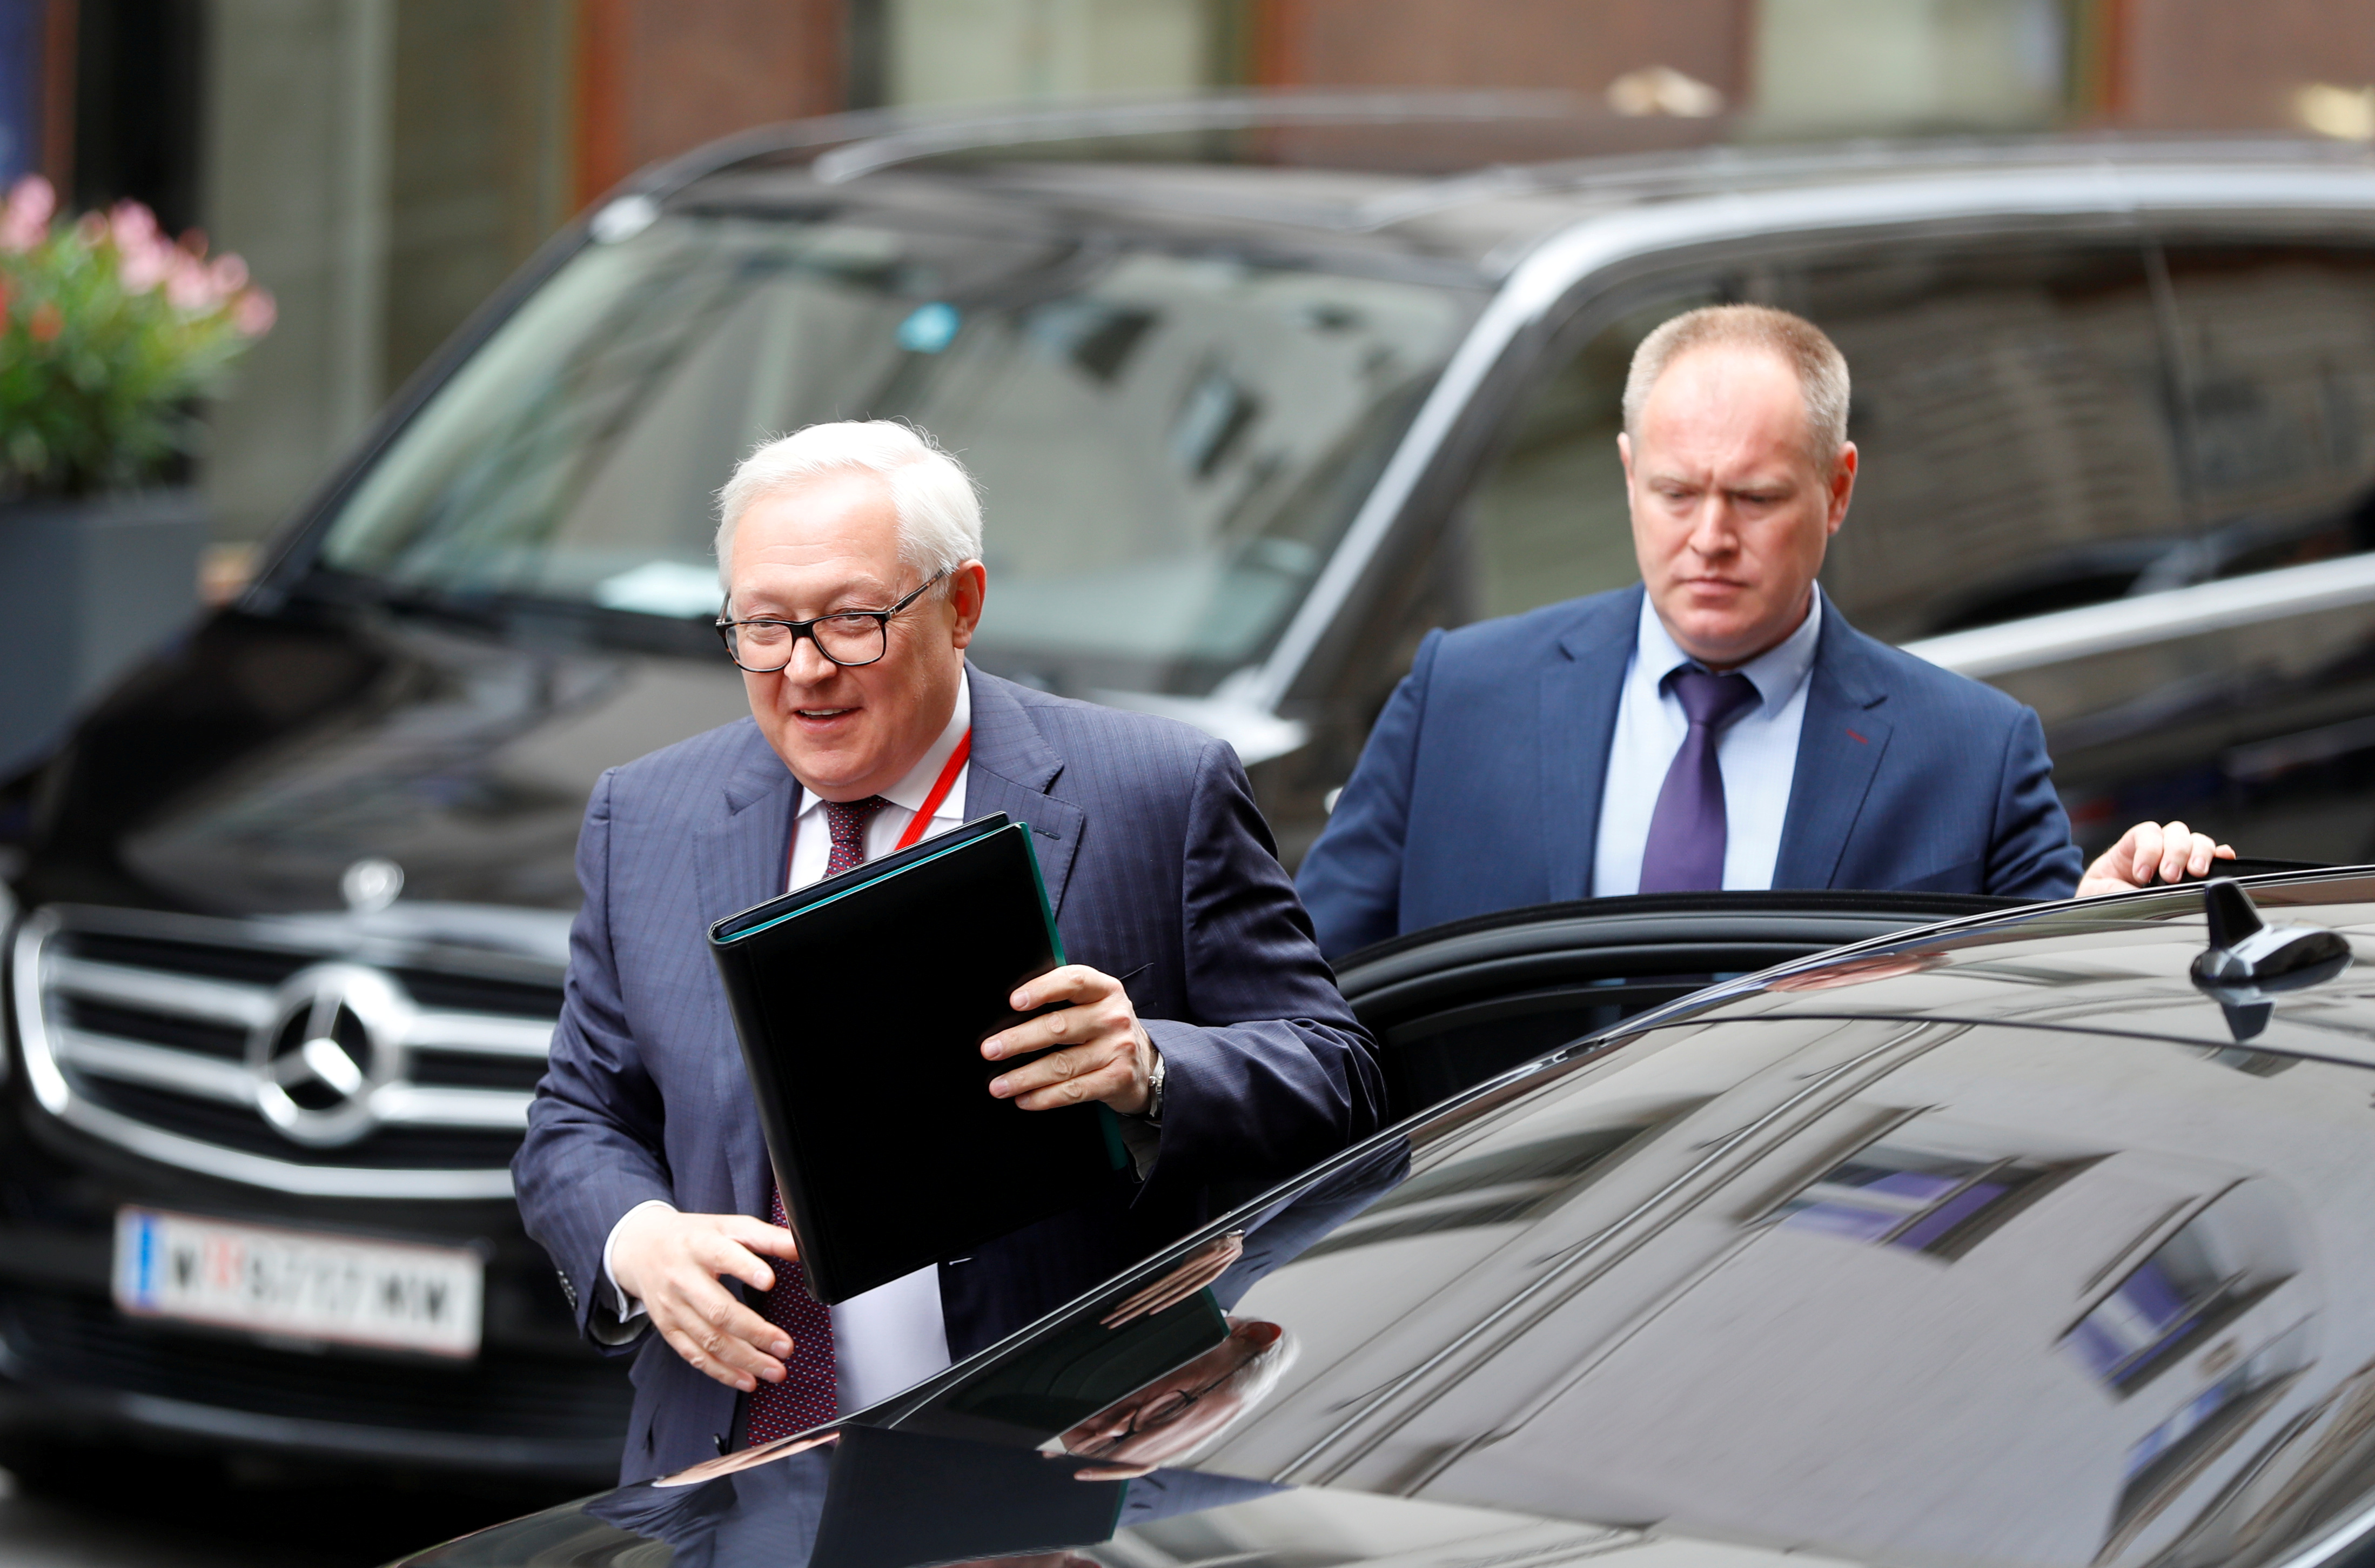 Russian Deputy Foreign Minister Sergei Ryabkov arrives for a meeting in Vienna